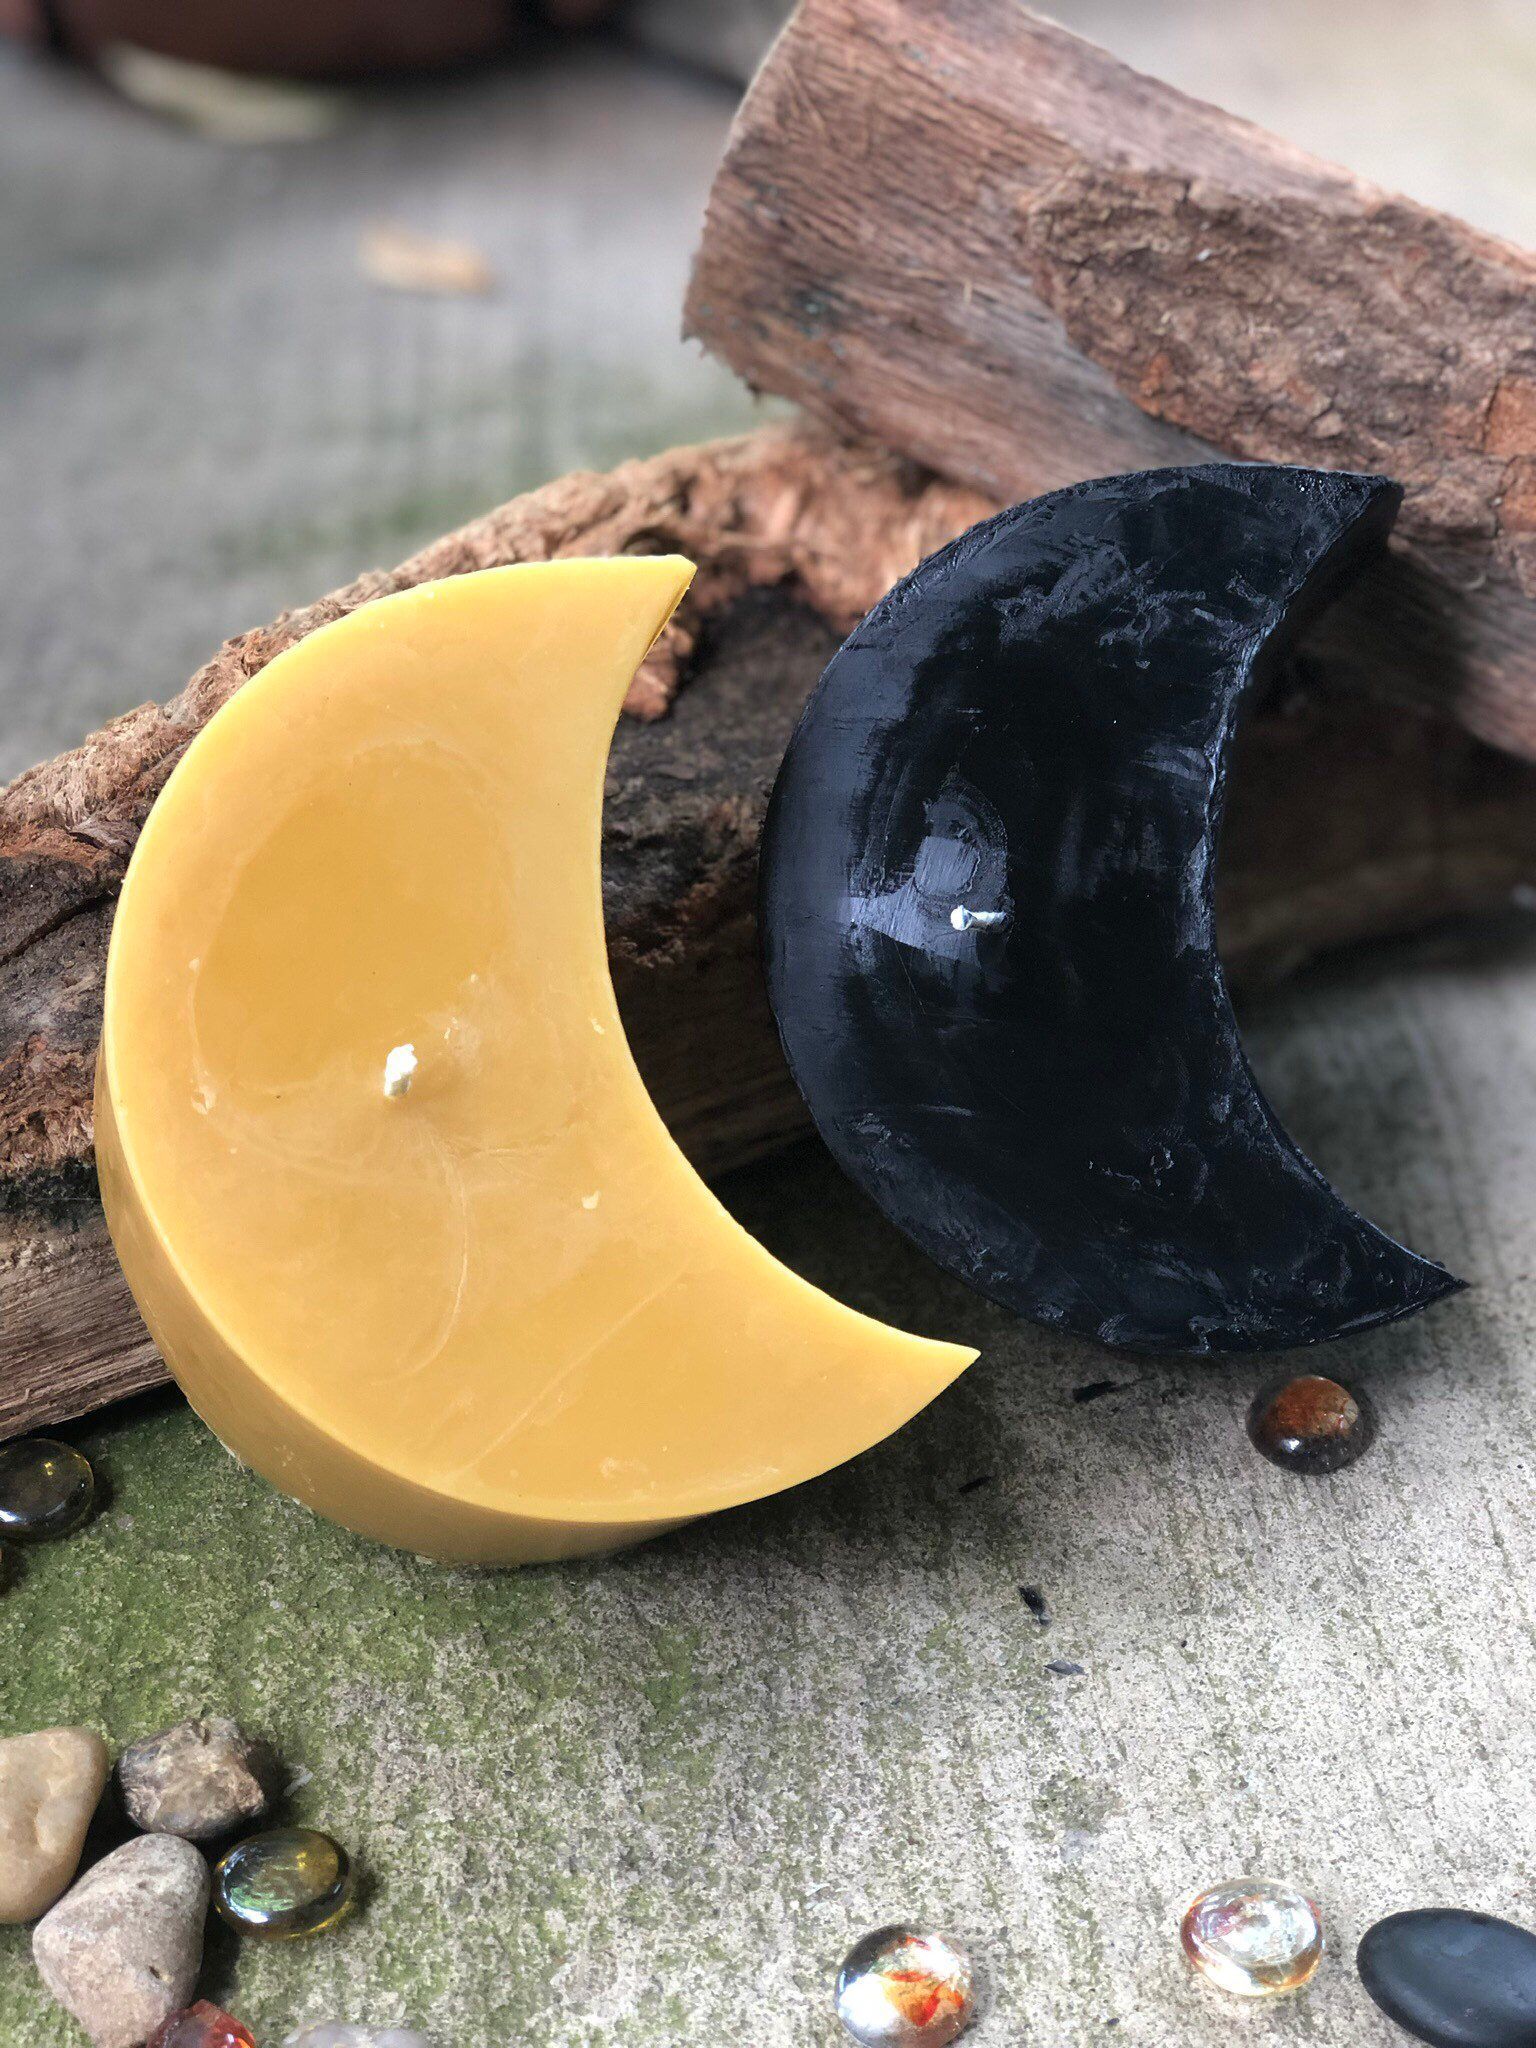 100% pure beeswax Half Moon shaped candle-extra large large beeswax moon candle-6